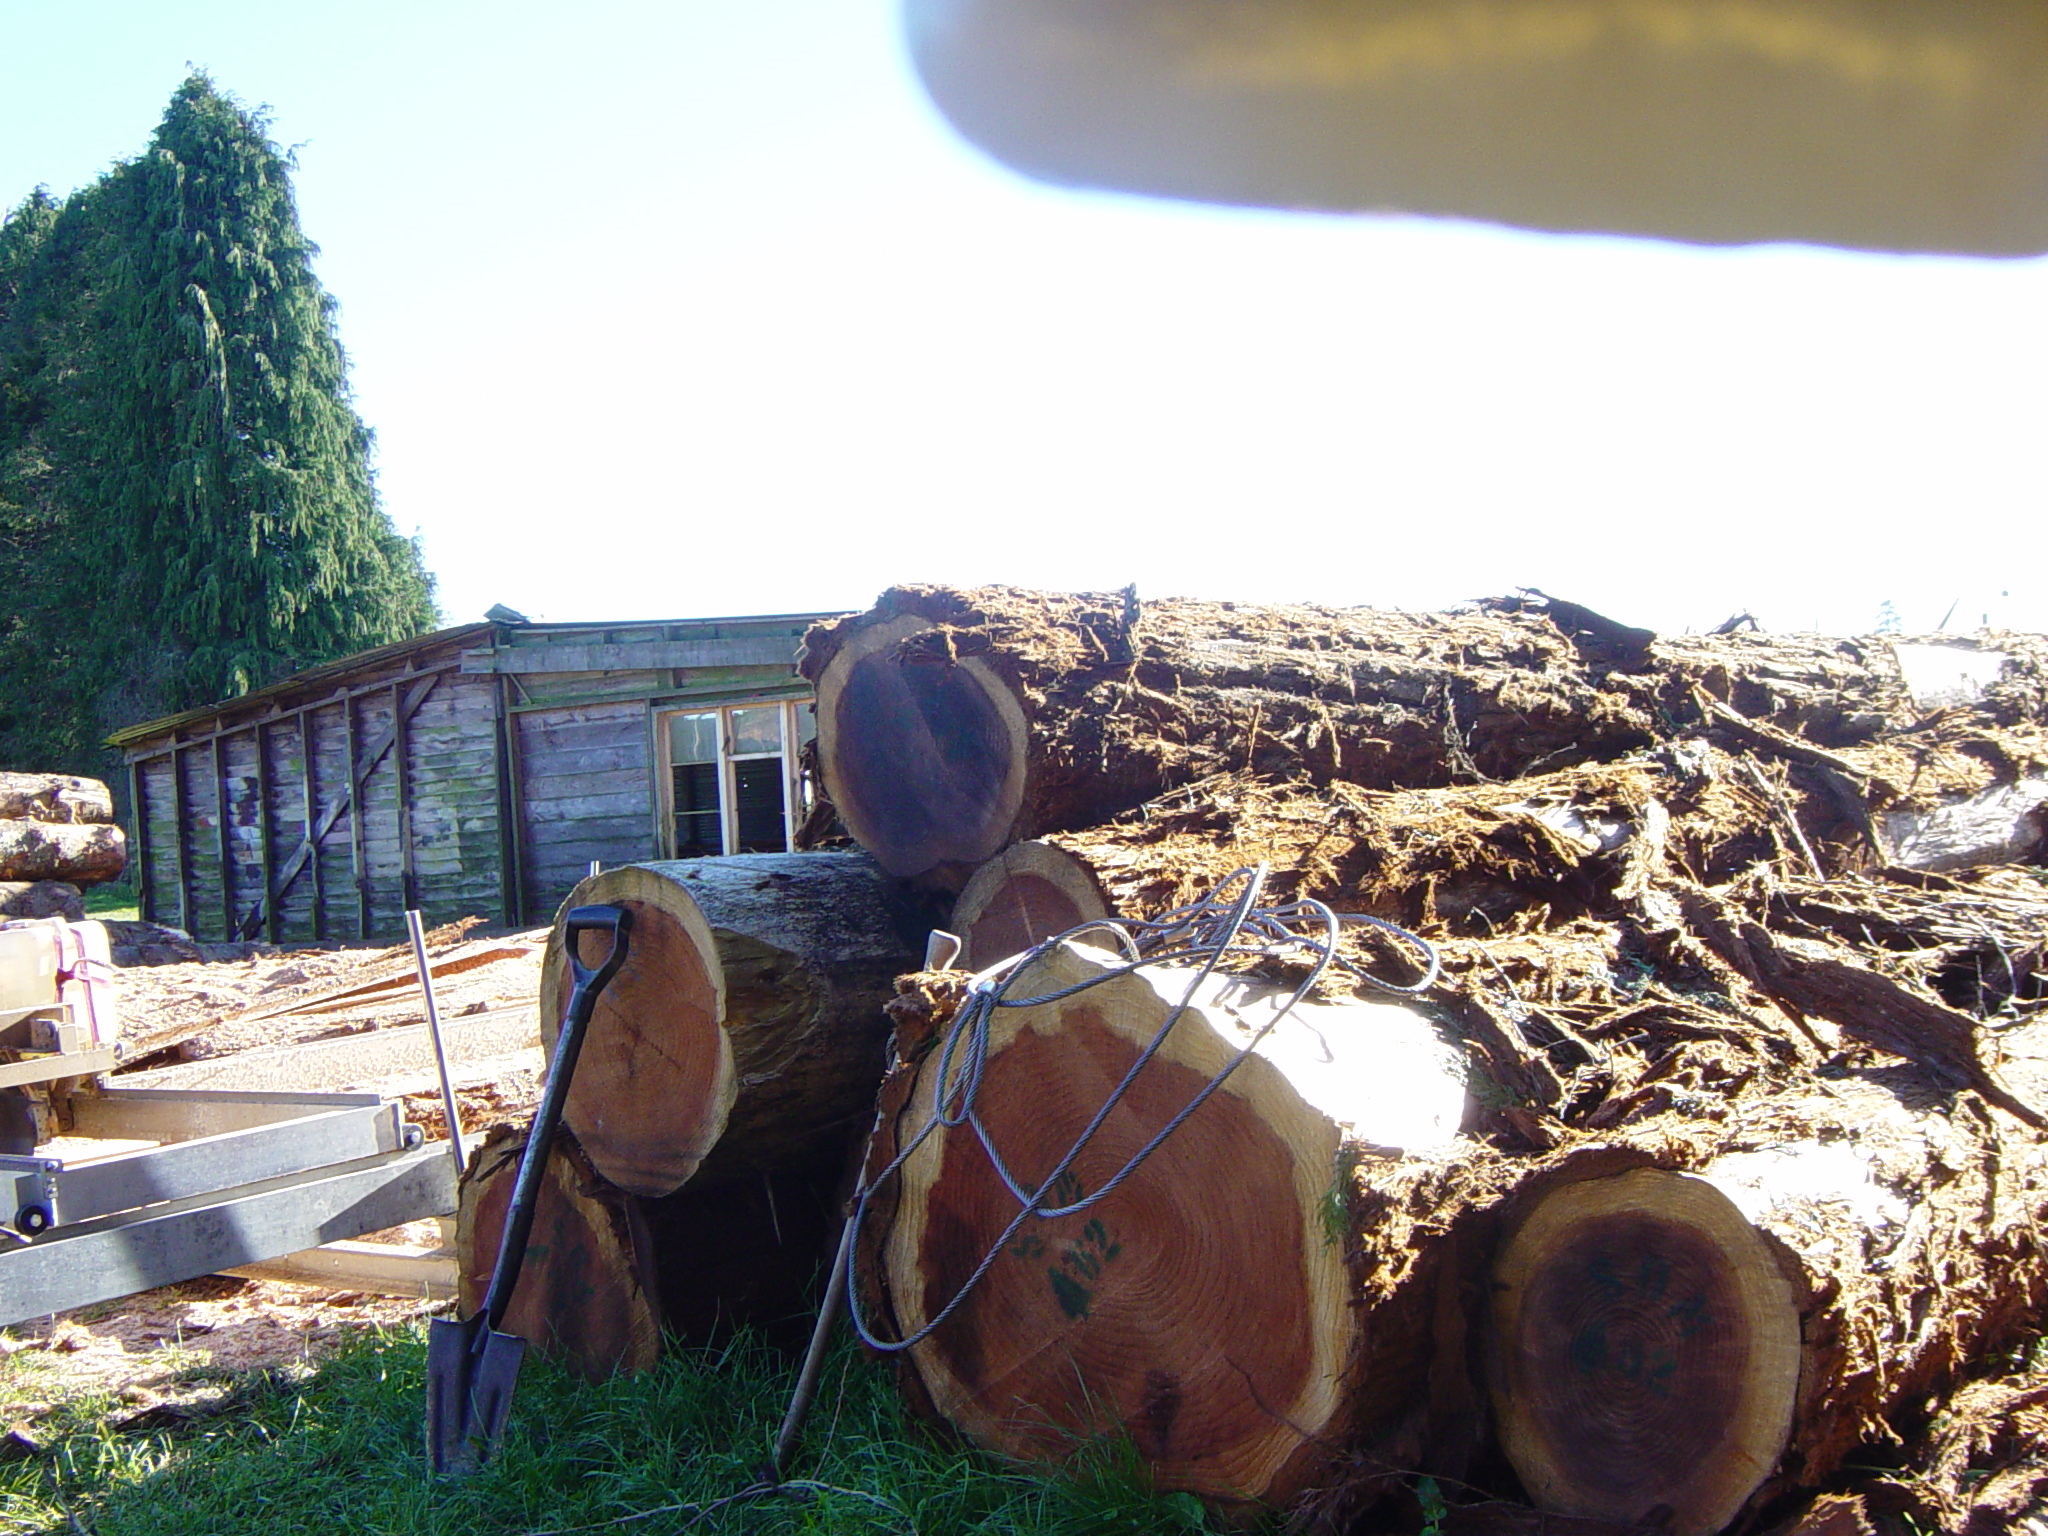 Redwood logs ready for sawing